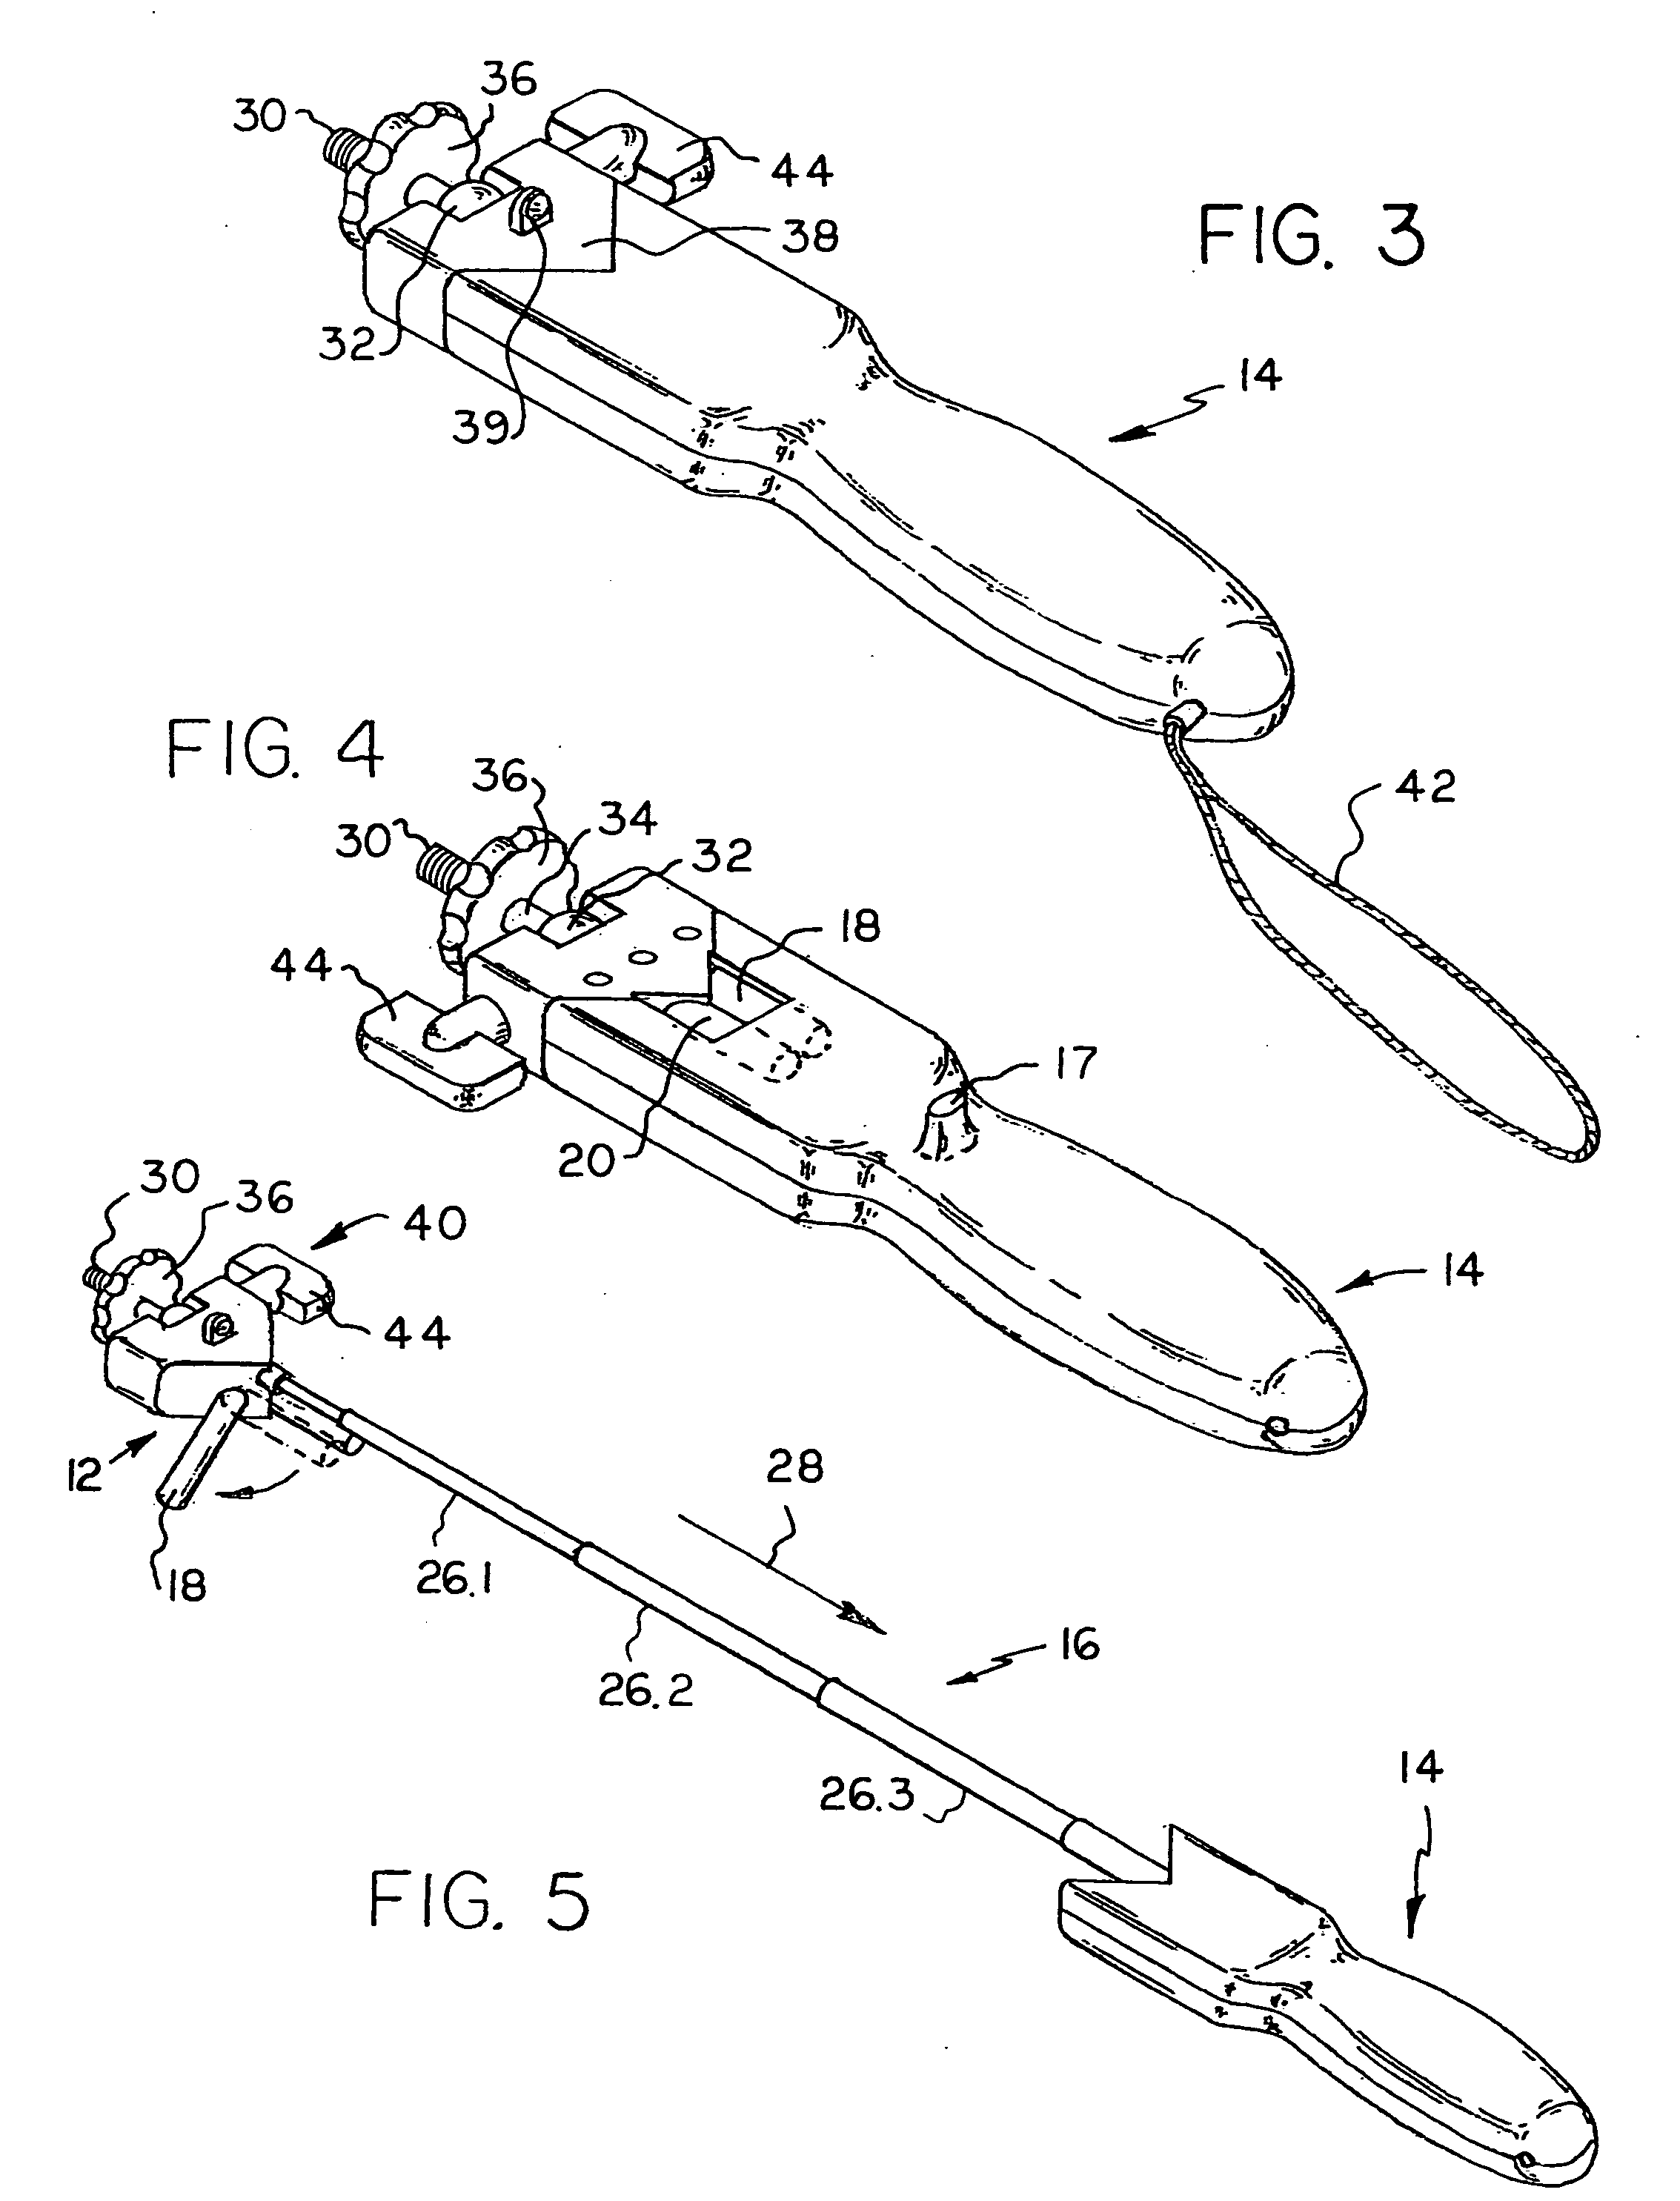 Apparatus for supporting a camera and method for using the apparatus